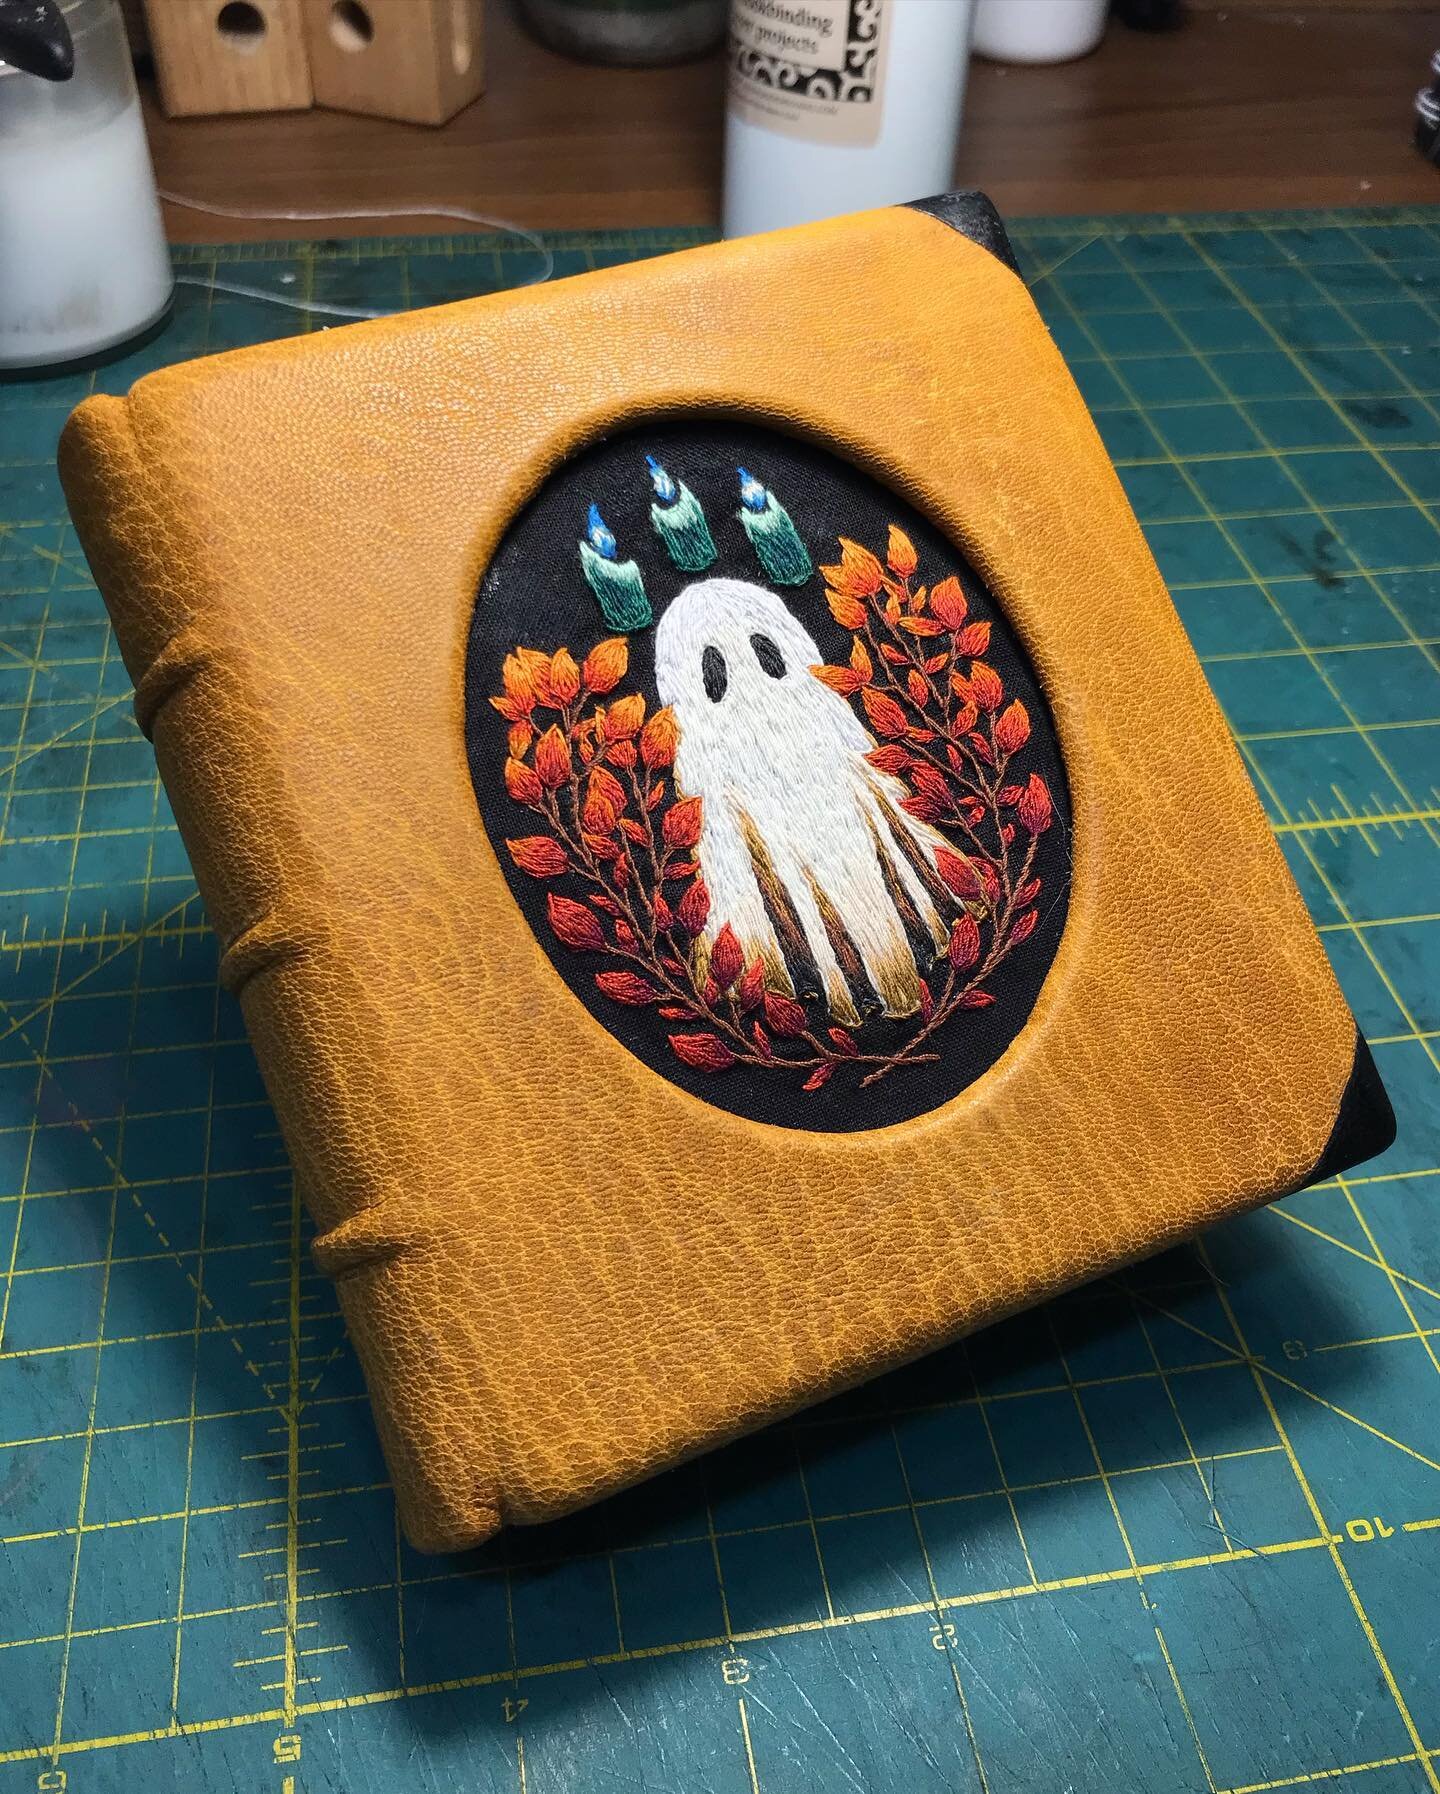 Not even tooled yet and I&rsquo;m already happy! This little ghost definitely didn&rsquo;t let me down. UPDATE for next release date: it has moved to the 29th at 12:00 pm CST!